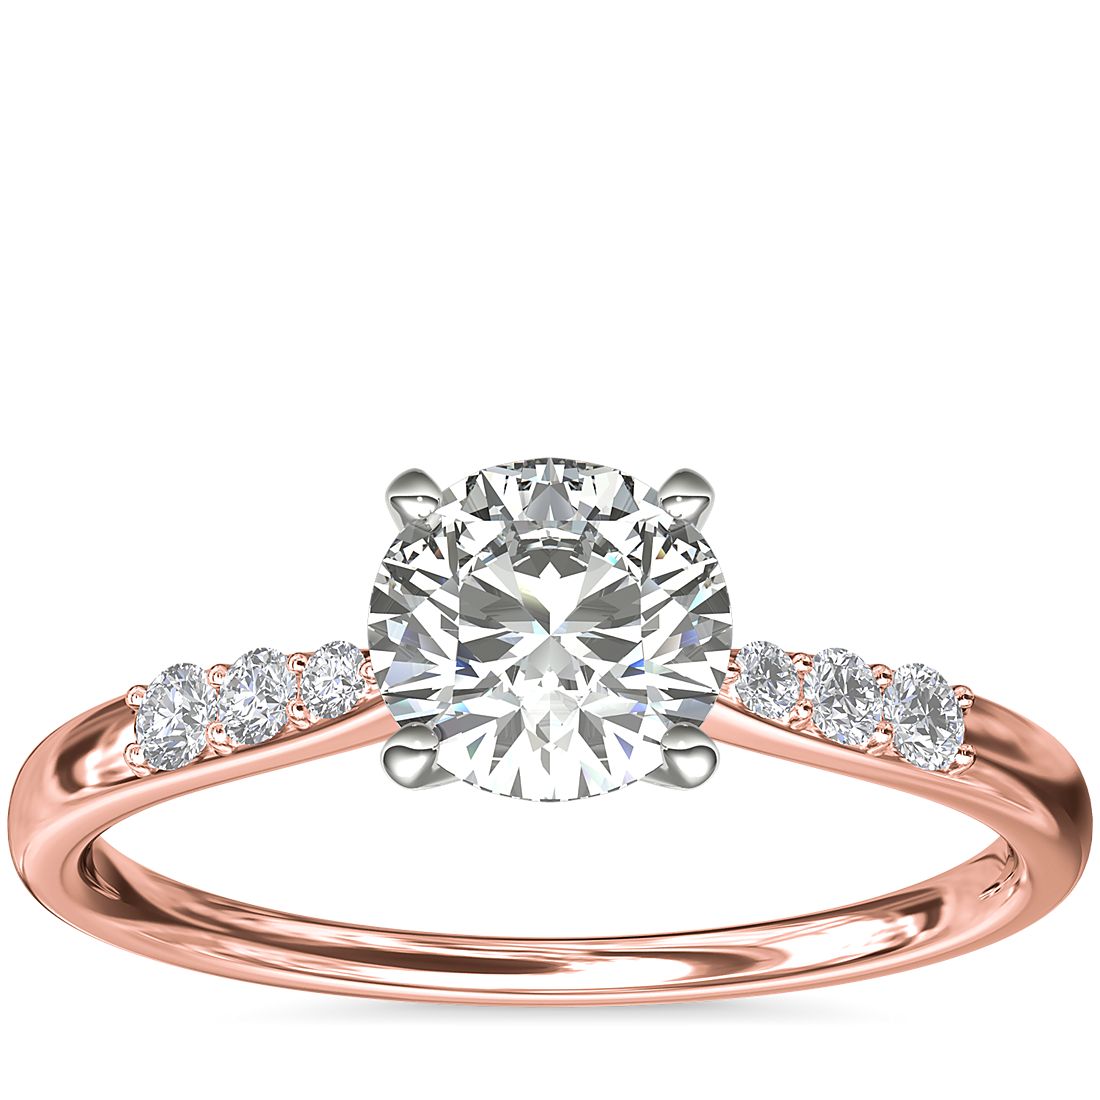 A rose gold engagement ring with a round 1-carat diamond.